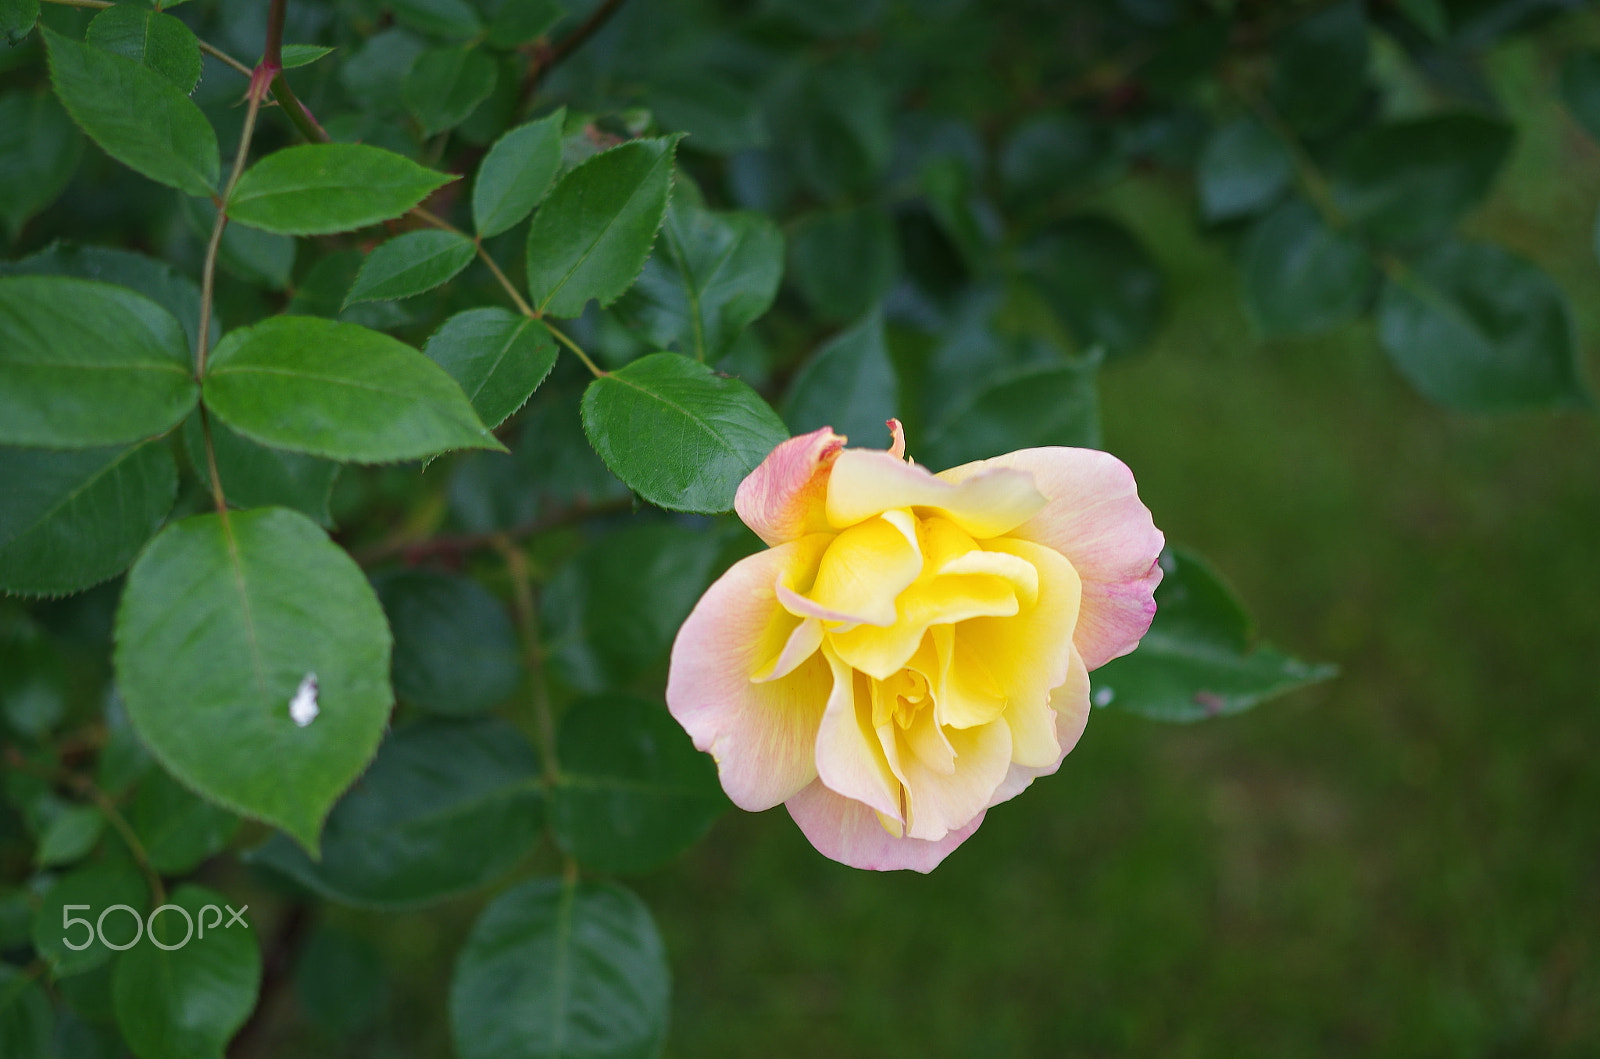 Pentax K-50 + Pentax smc DA 35mm F2.4 AL sample photo. My first rose in this year photography